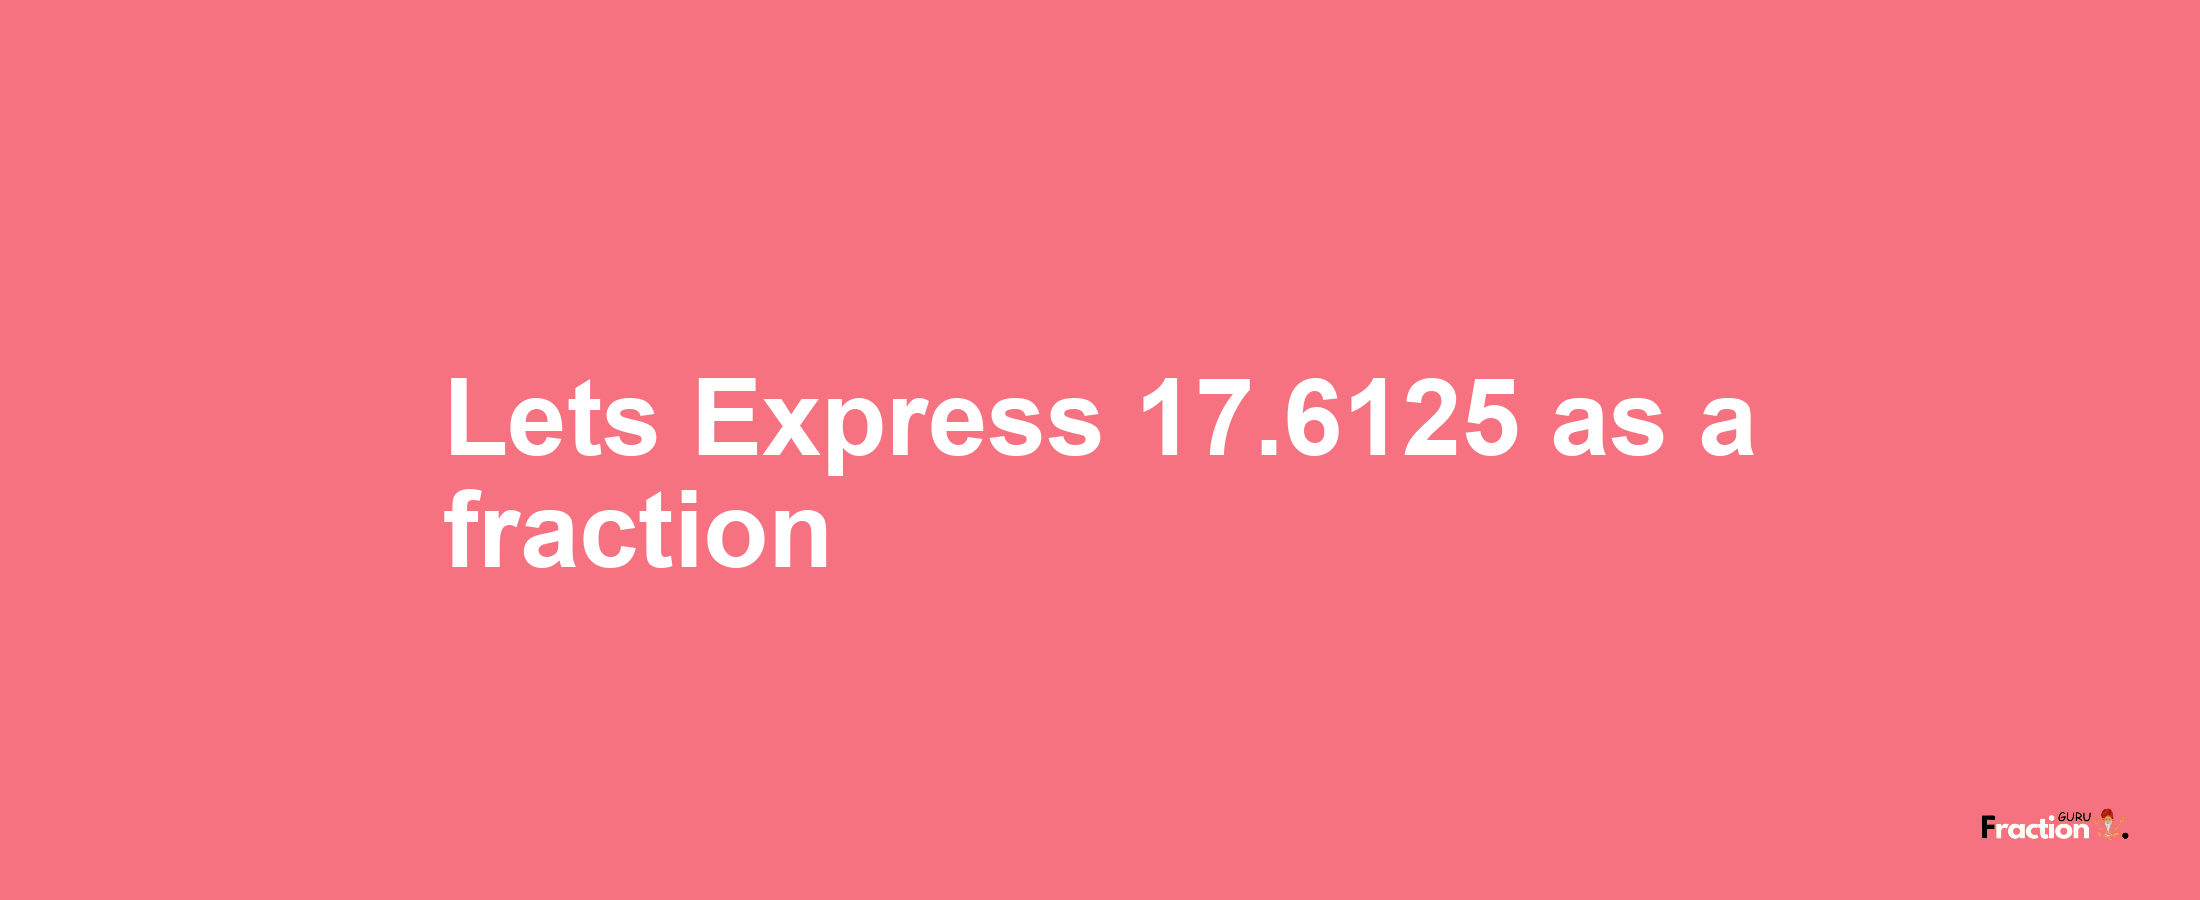 Lets Express 17.6125 as afraction